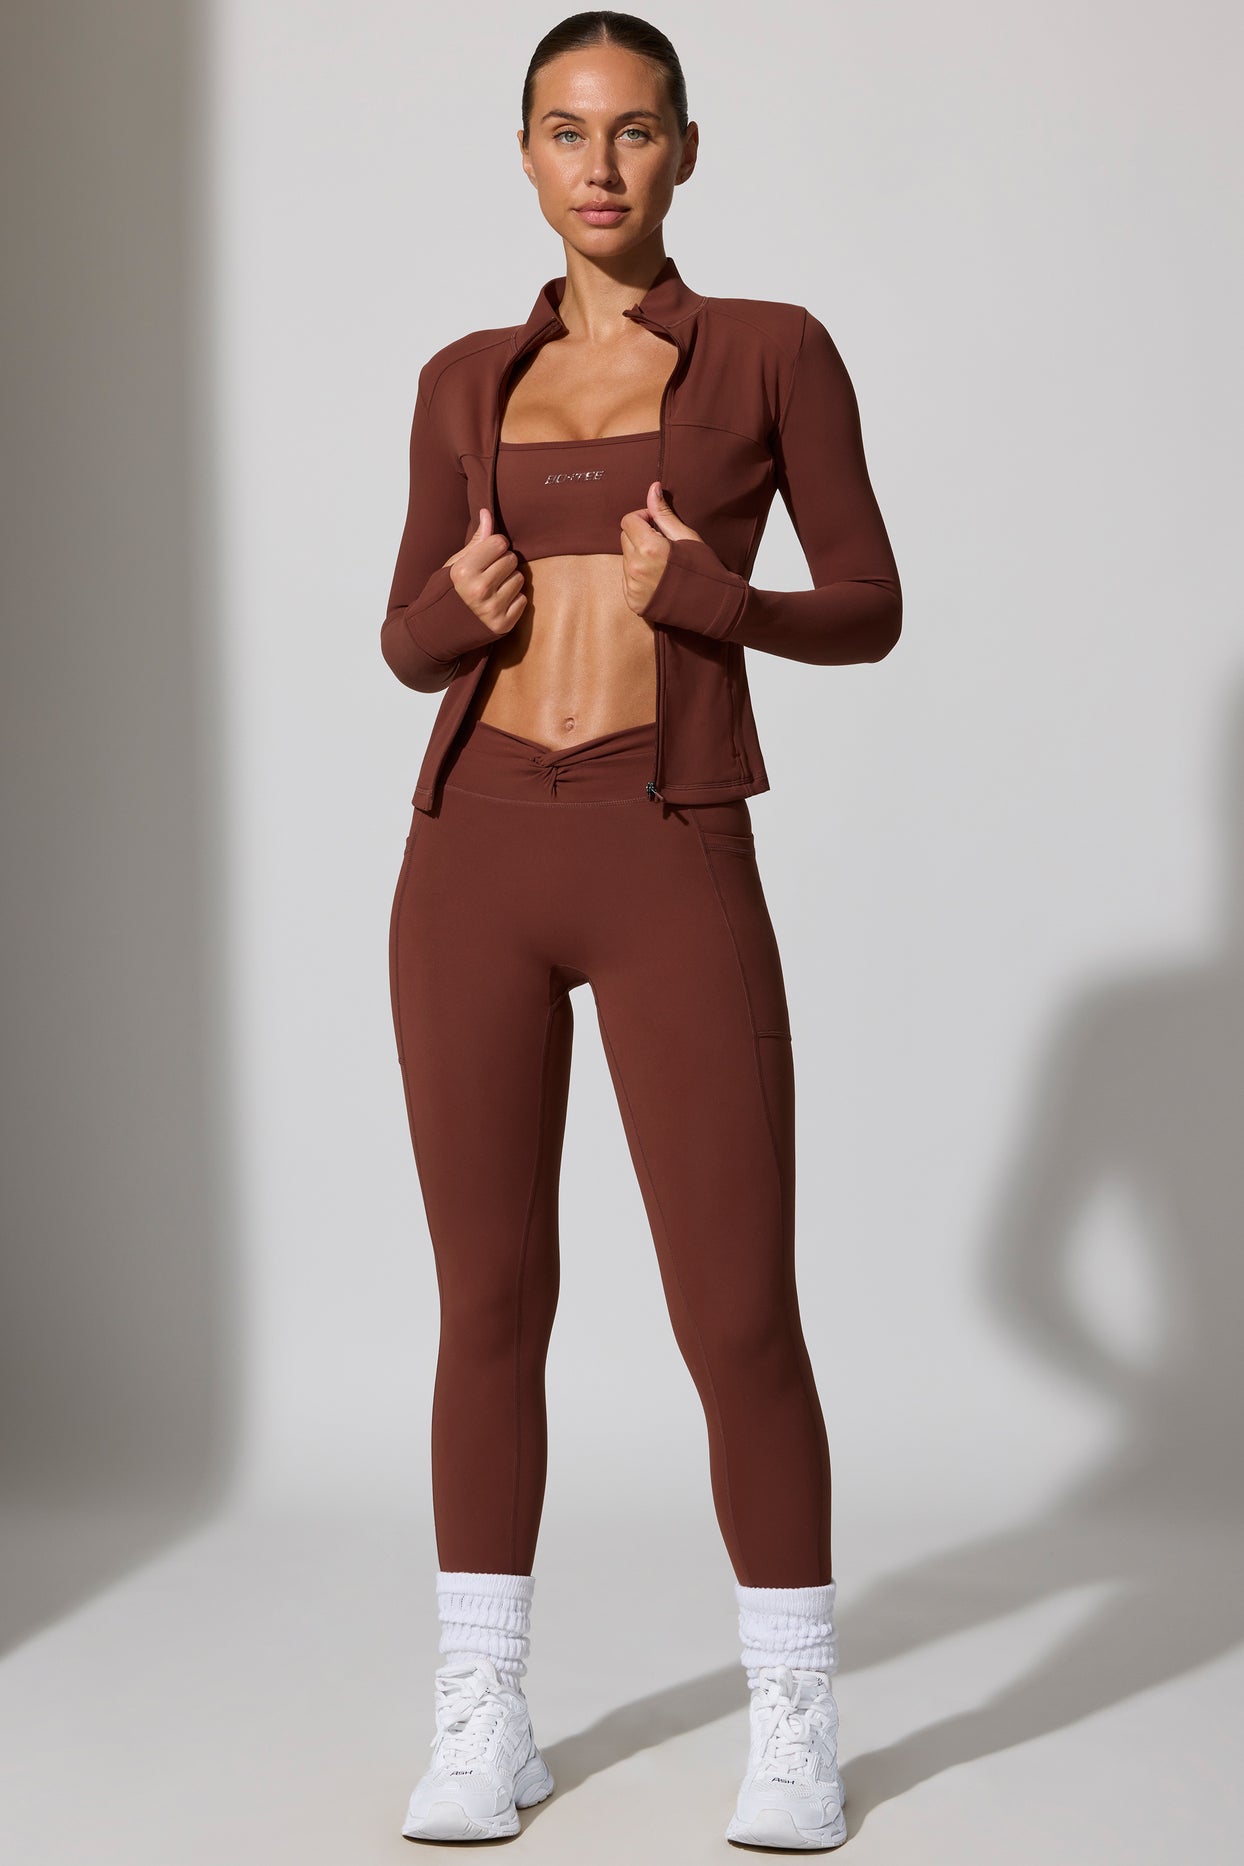 Petite Full Length Leggings with Pockets in Chocolate